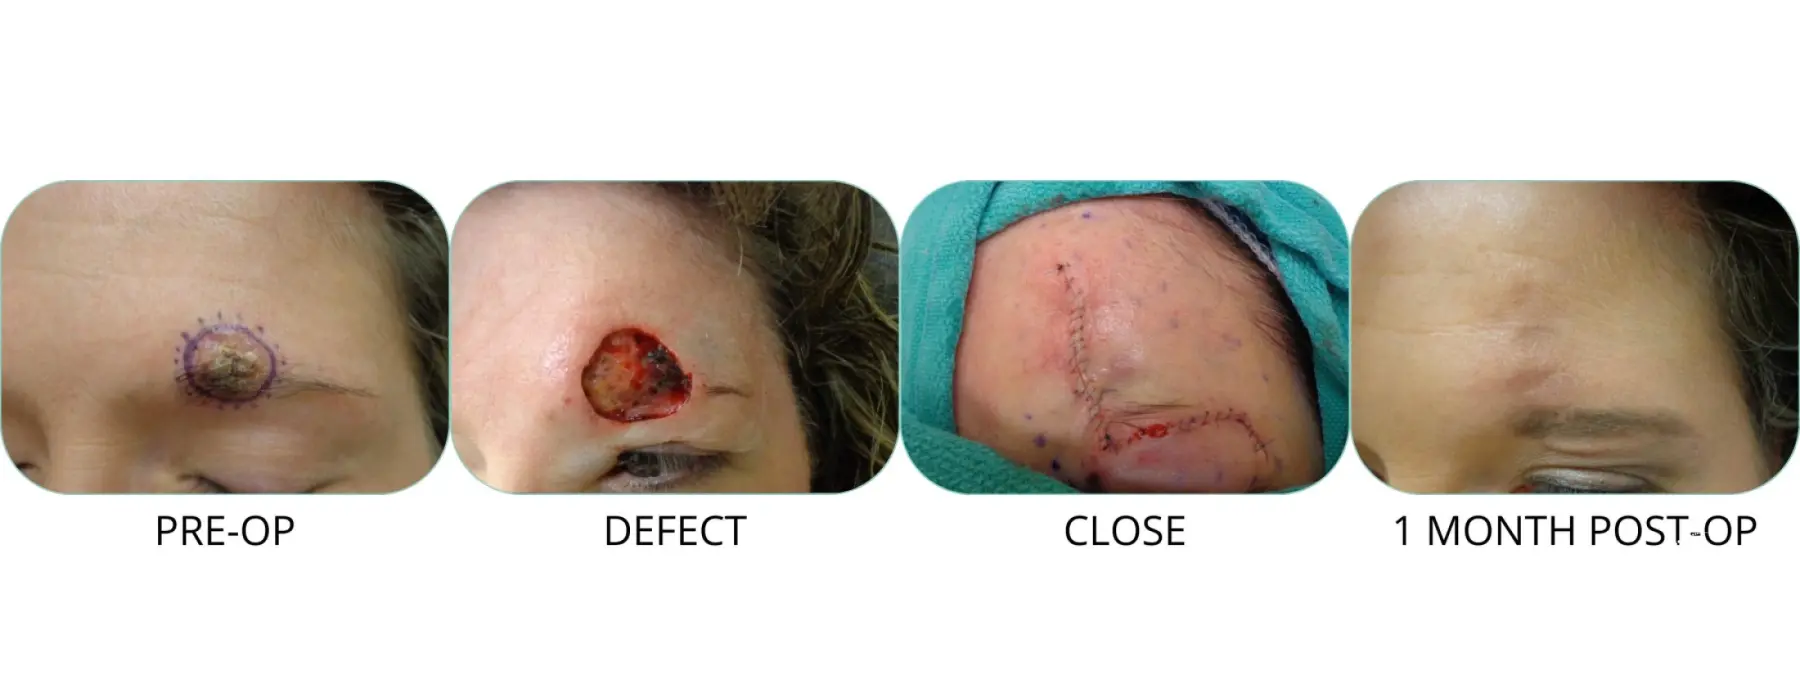 Basal Cell skin cancer, forehead near eyebrow - Mohs surgery - Before and After